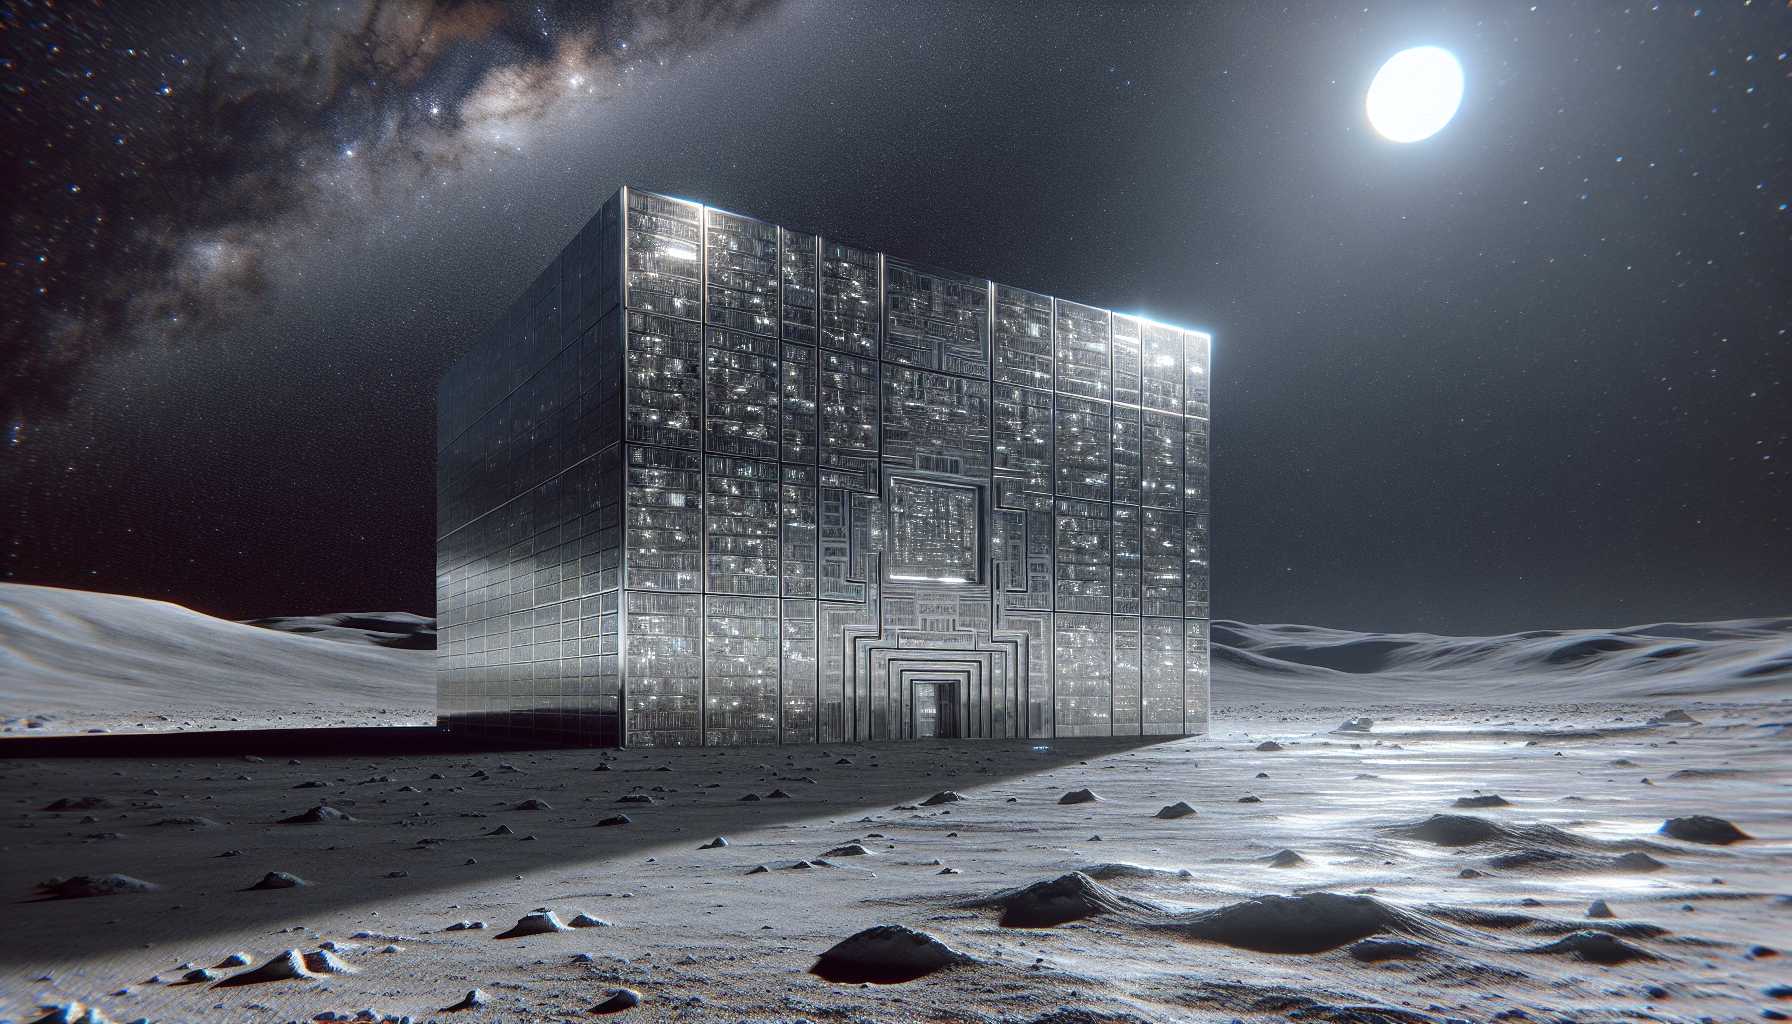 A futuristic library made of nickel etched with millions of pages, resting on the moon's surface